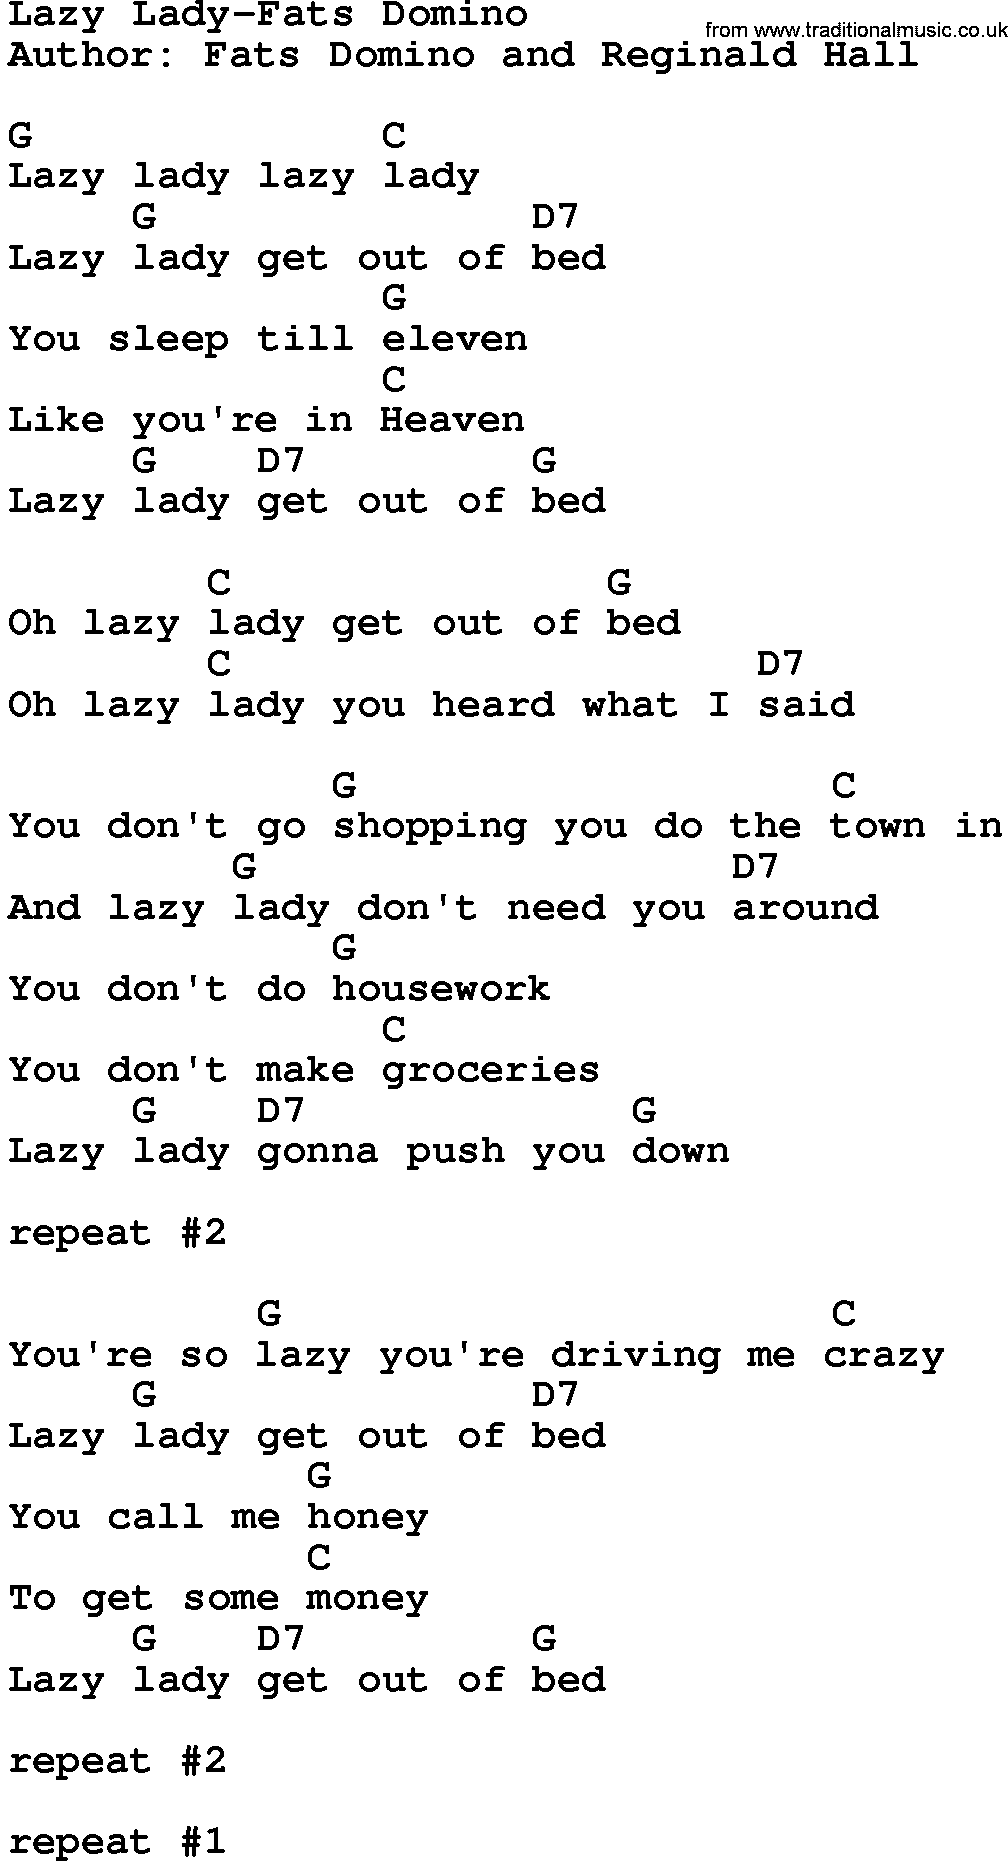 Country music song: Lazy Lady-Fats Domino lyrics and chords